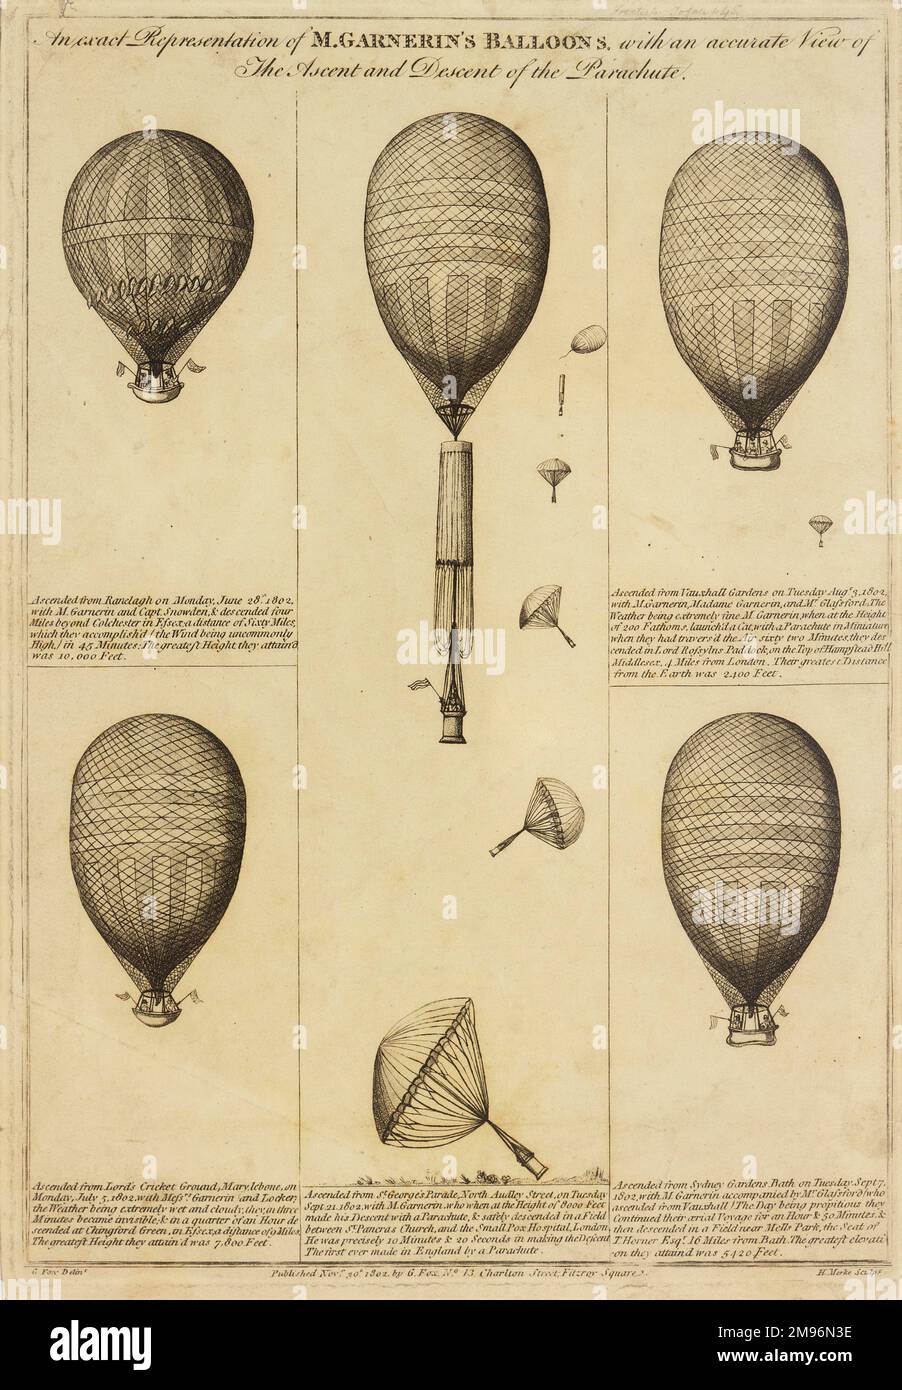 Five illustrations of 'An exact representation of M. Garnerin's Balloons with an accurate view of the ascent and descent of the parachute'. Top left: ascended from Ranelagh, 28 June 1802, passengers Garnerin and Snowden, landed 45 minutes later near Colchester, Essex. Bottom left: ascended from Lord's Cricket Ground, 5 July 1802, passengers Garnerin and Locker, landed 15 minutes later at Chingford Green, Essex. Centre: ascended from North Audley Street, 21 September 1802, passenger Garnerin, landed 10 minutes later in a parachute near St Pancras Church -- claimed to be the first parachute de Stock Photo